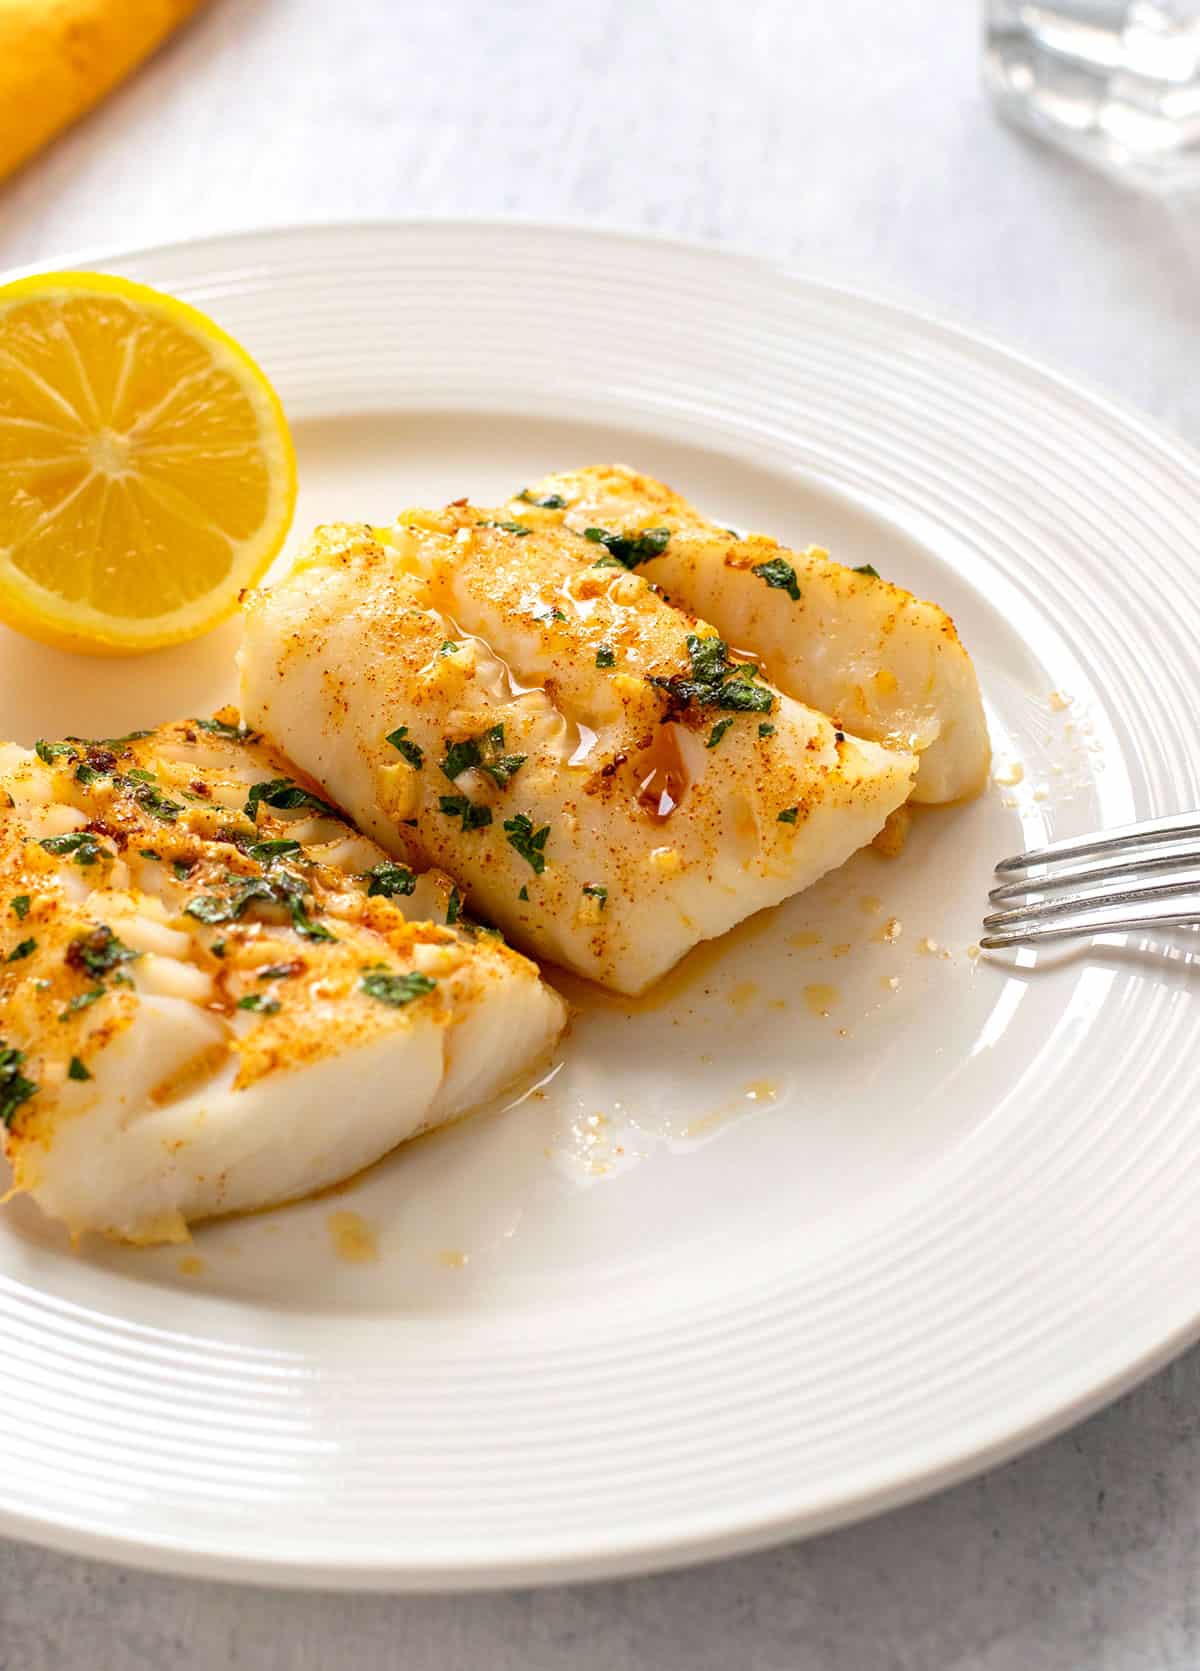 two pieces of garlic butter baked cod on a plate garnished with parsley